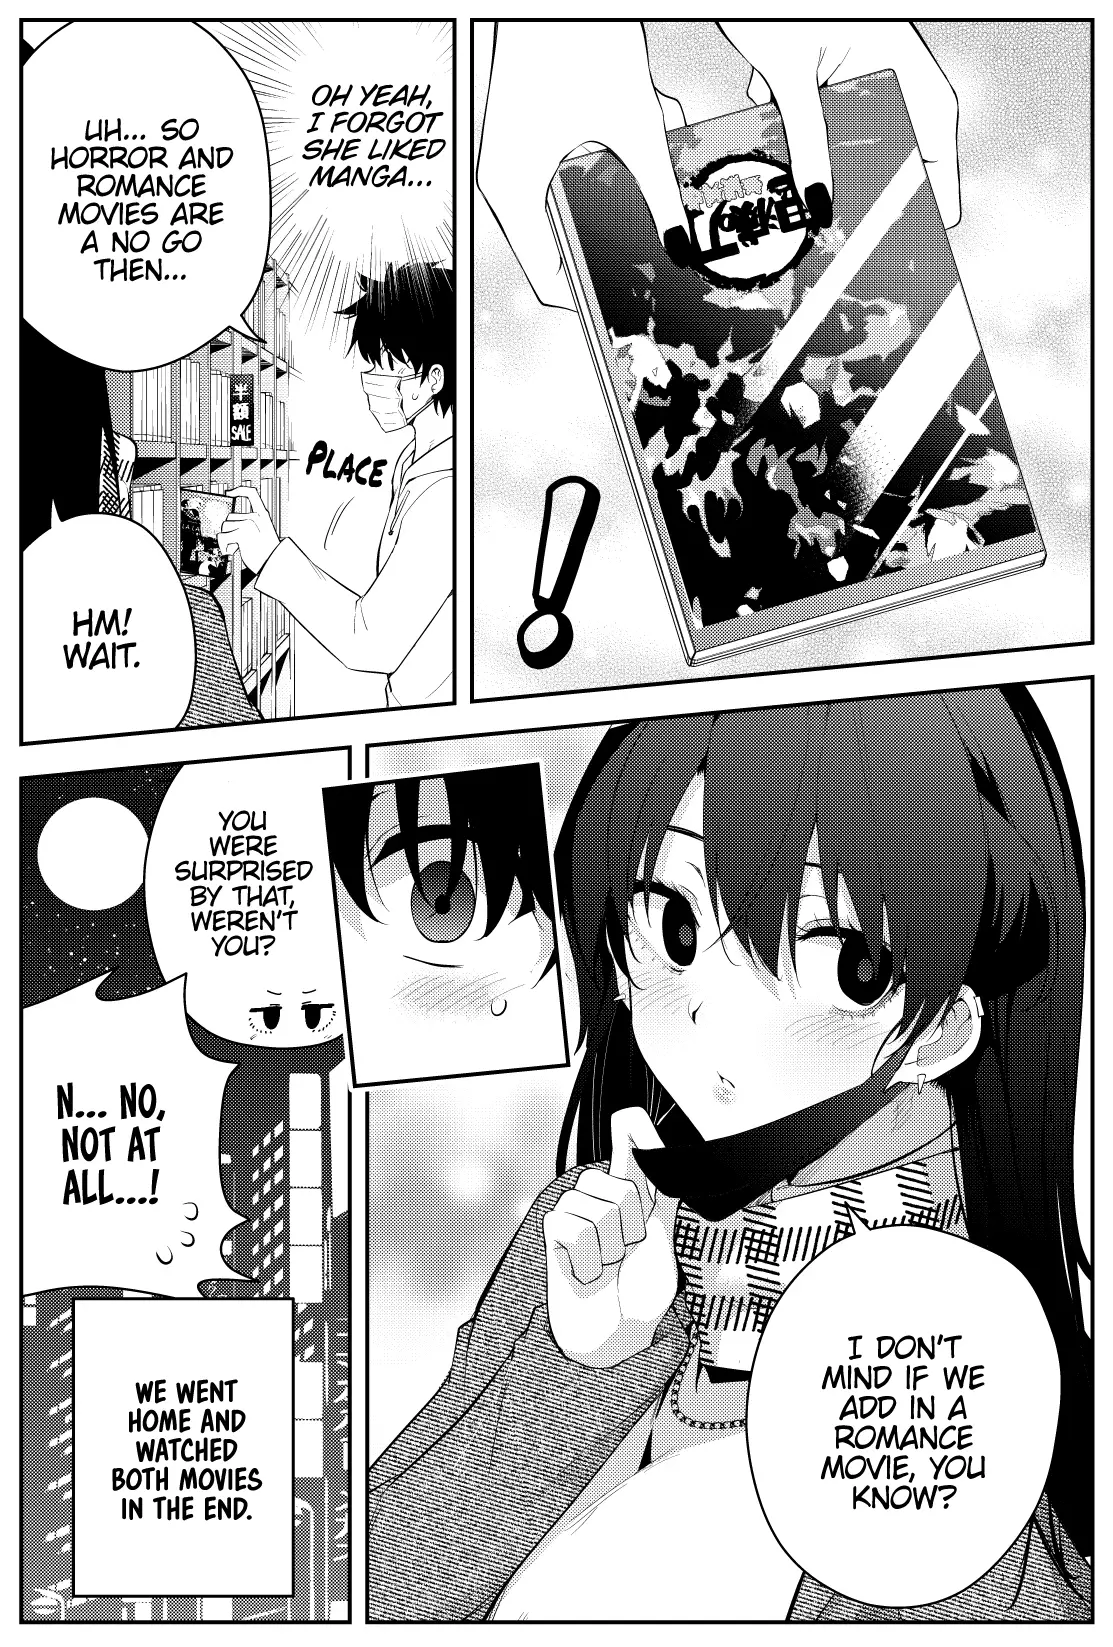 The Story Of A Manga Artist Confined By A Strange High School Girl - 36 page 4-4c6c7fe9